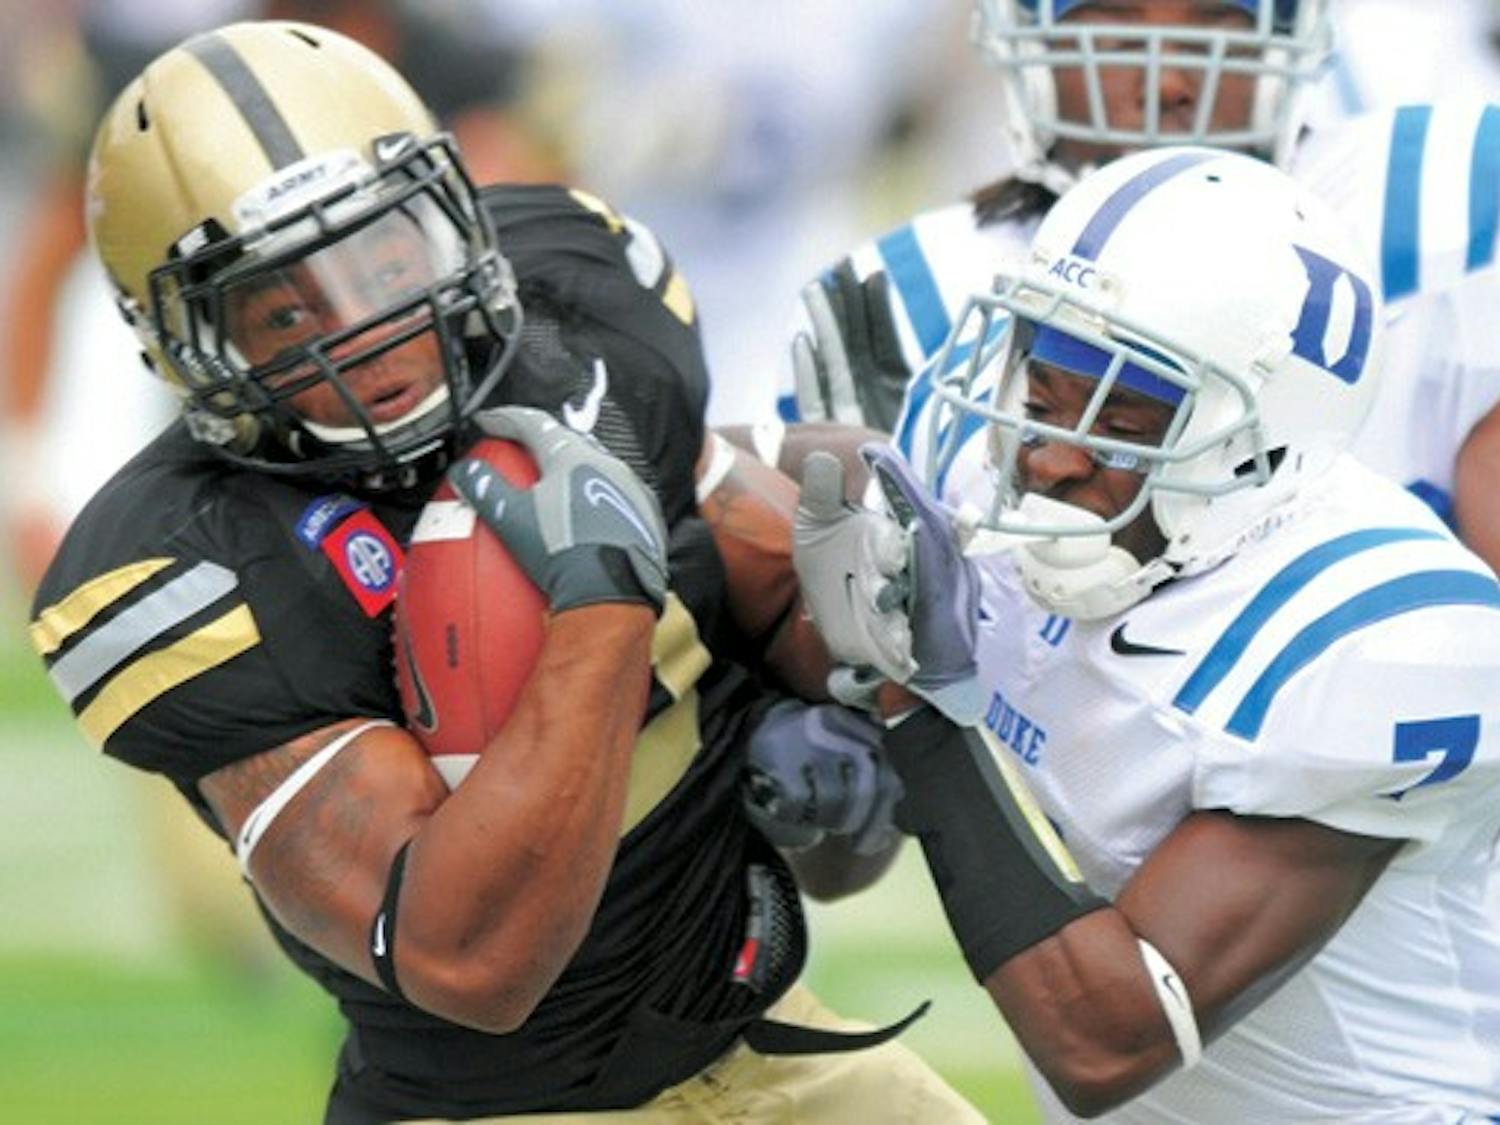 The Blue Devils topped Army, 35-14, in the two teams’ encounter last Sept. 12 in West Point, N.Y. Duke looks to win again—this time, on its home turf.